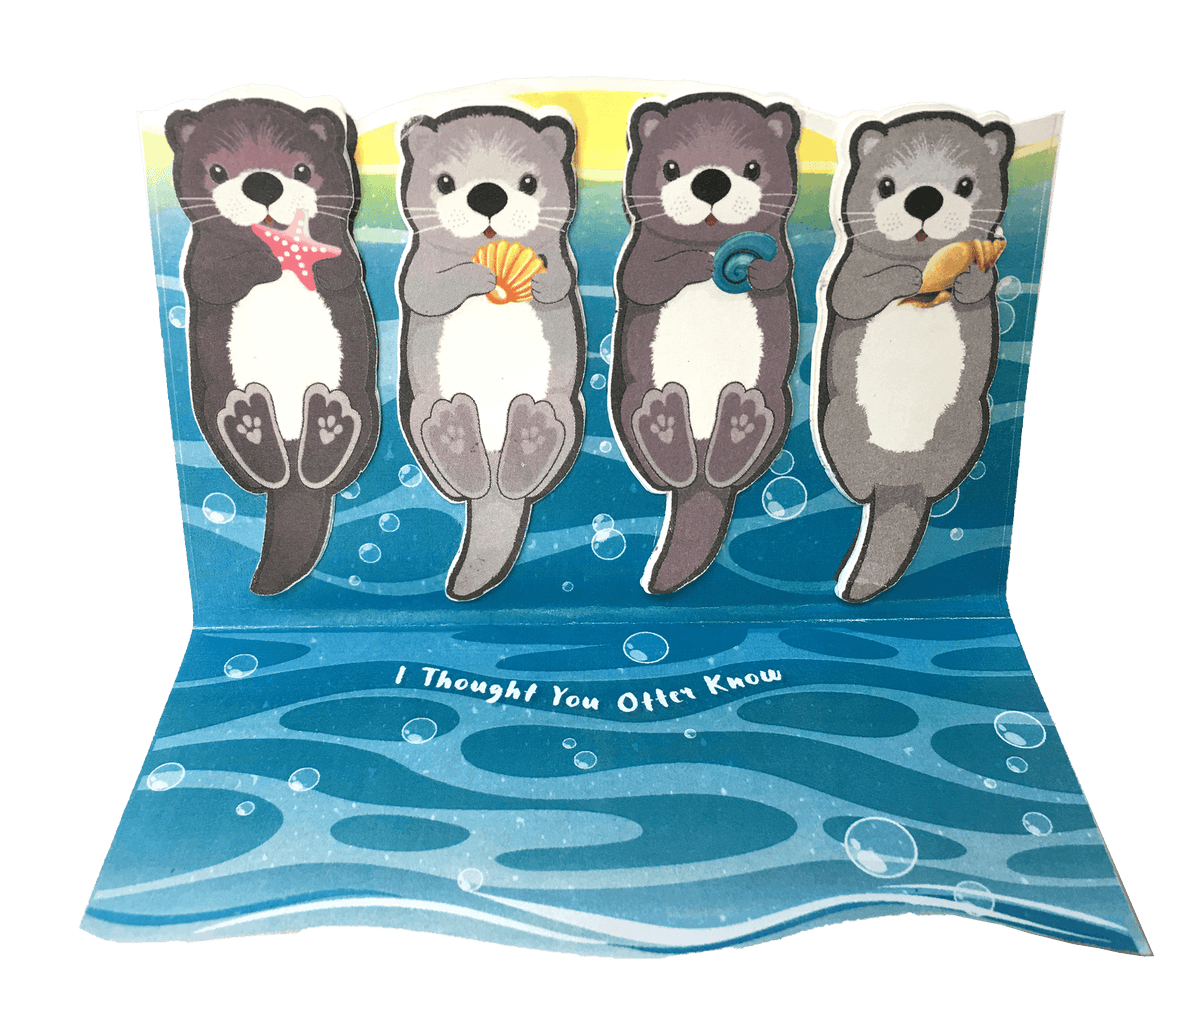 You Otter Know Memo Tabs